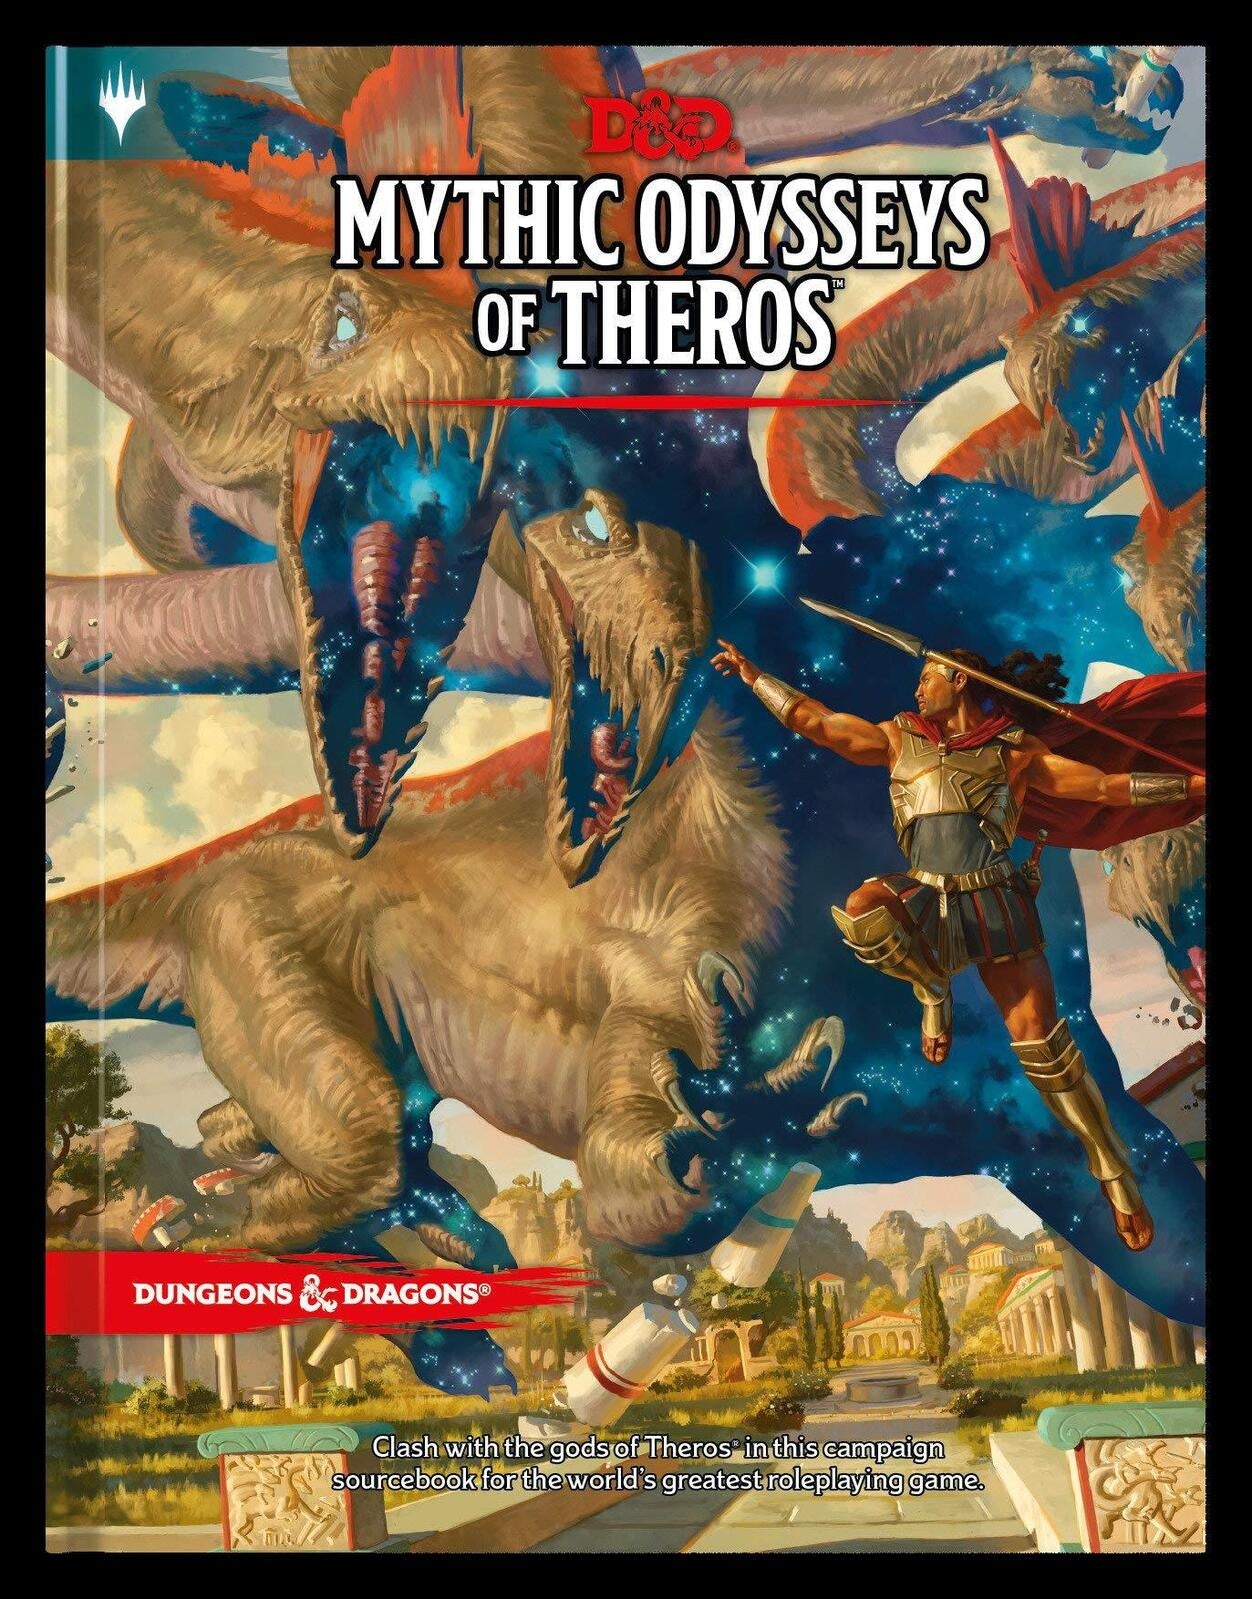 Mythic Odysseys of Theros - Dungeons & Dragons - 5E